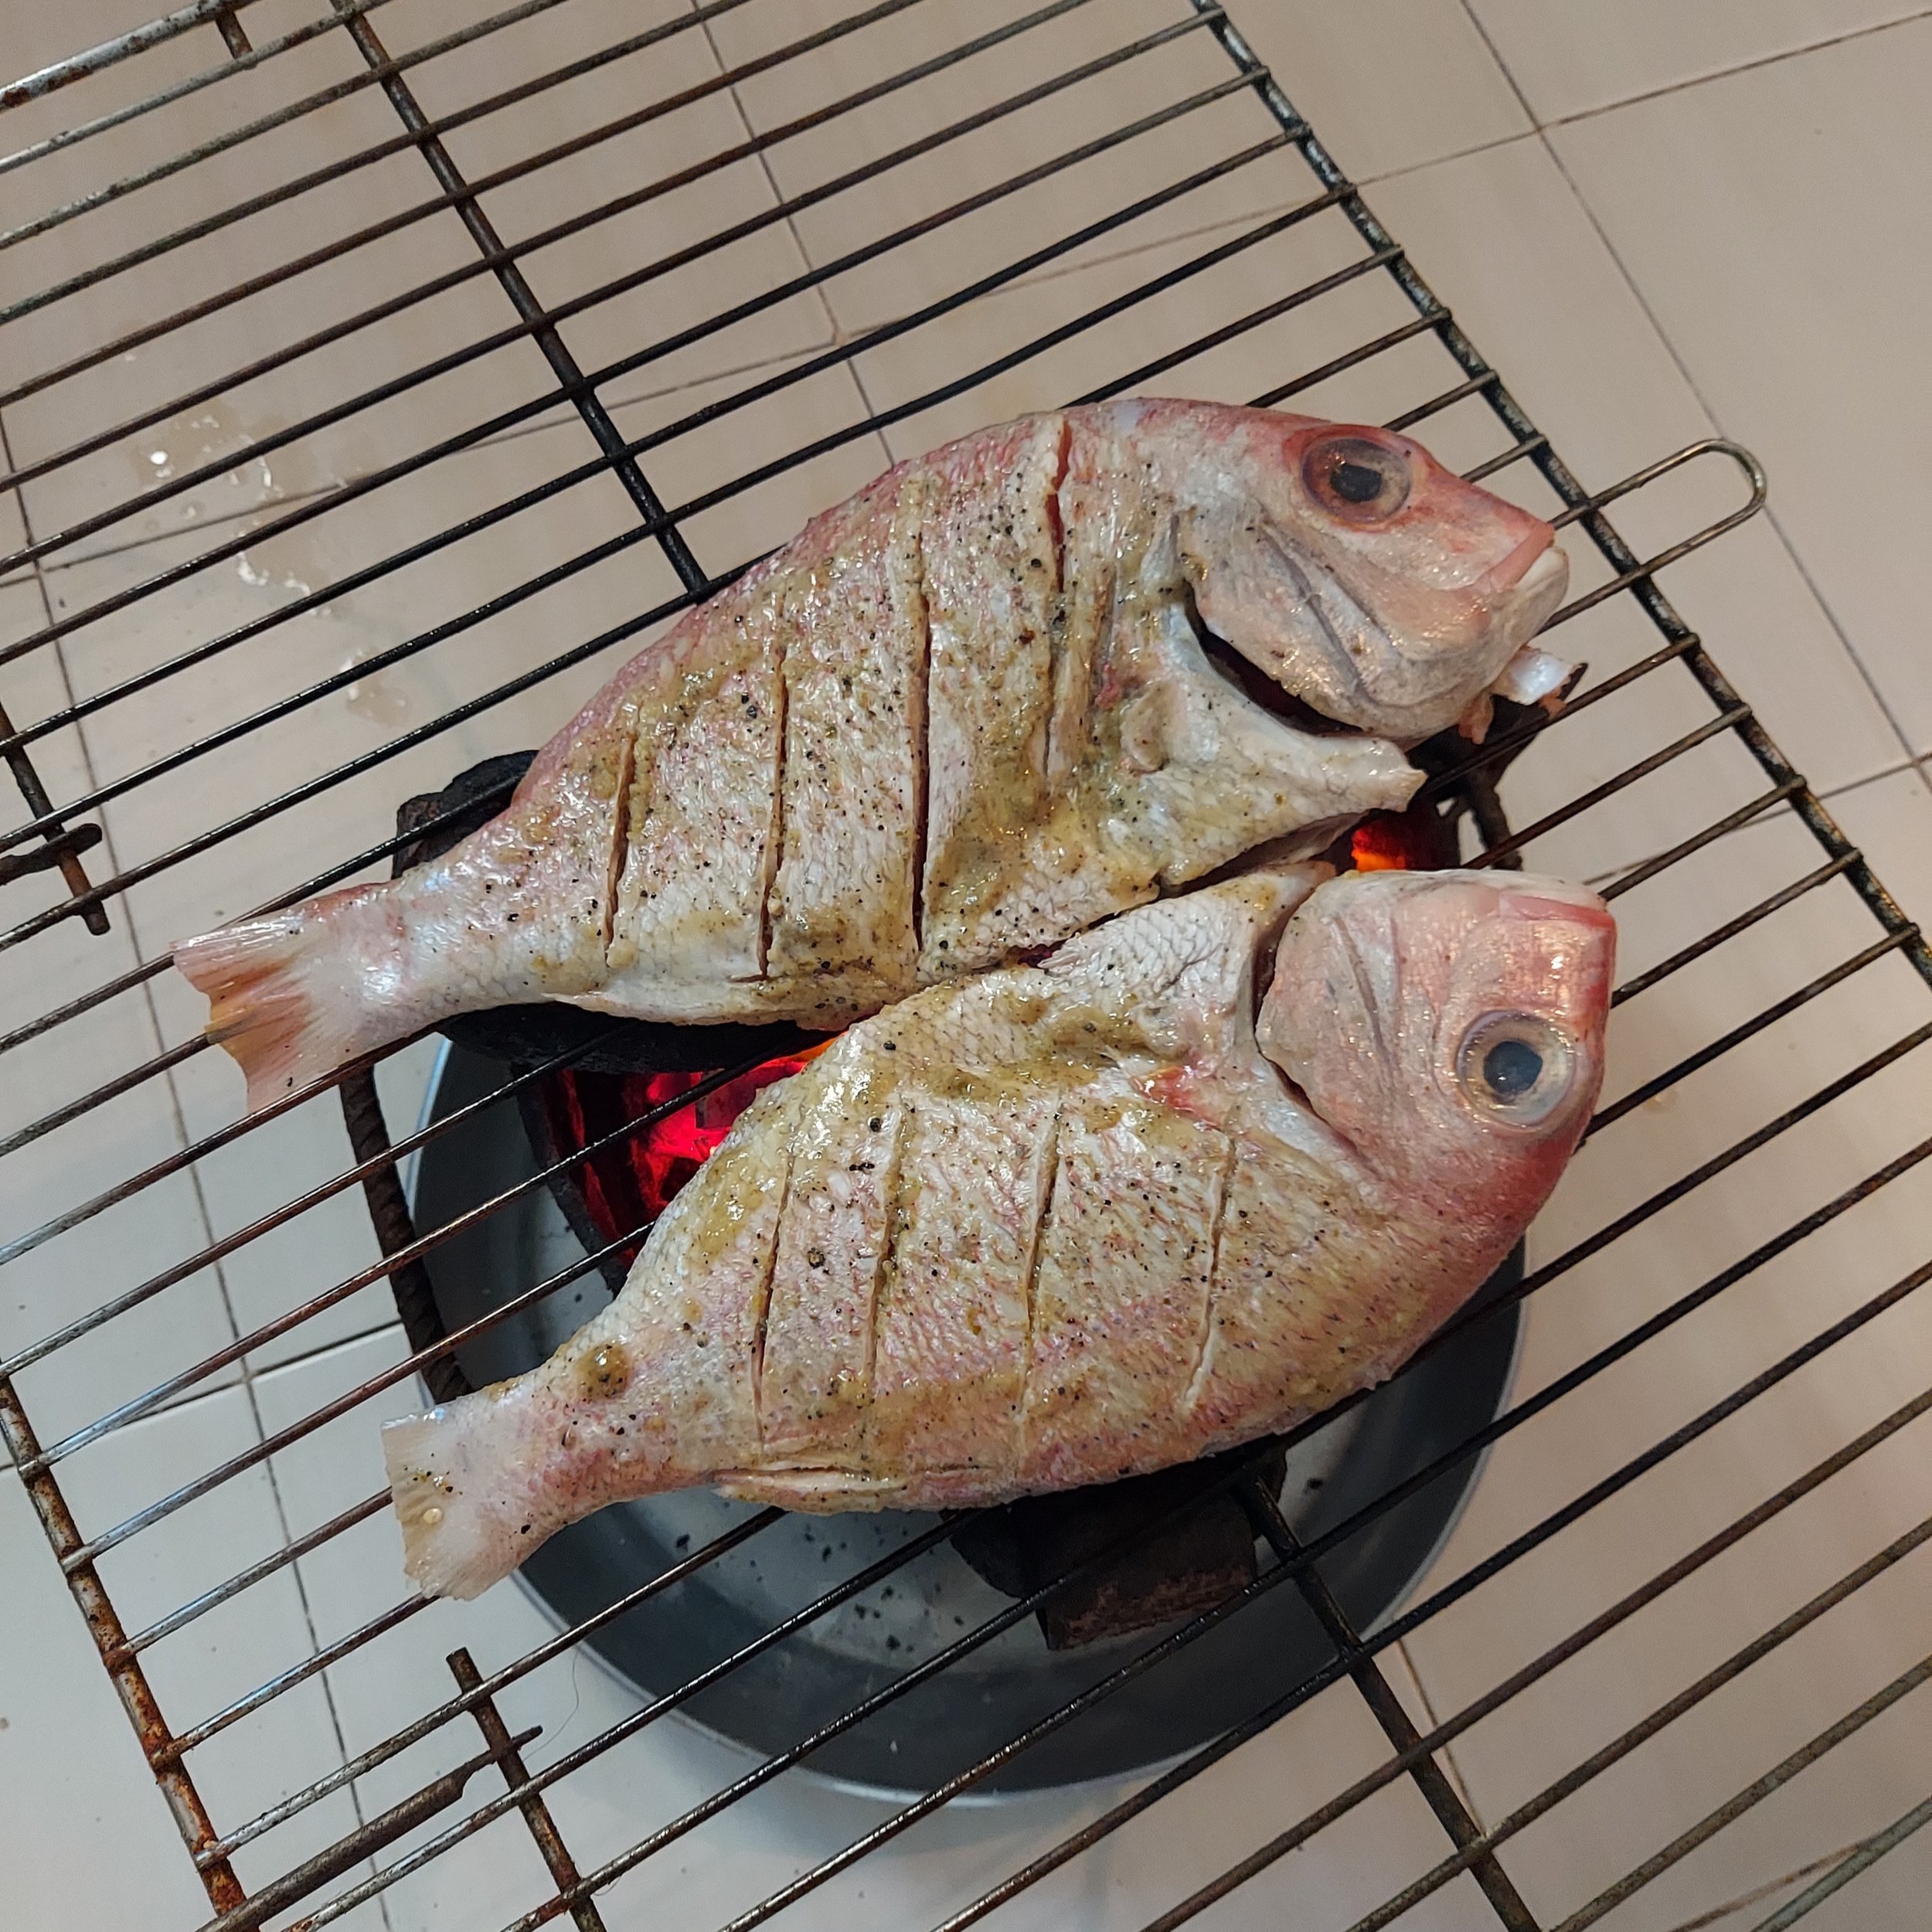 Grilling the red snapper